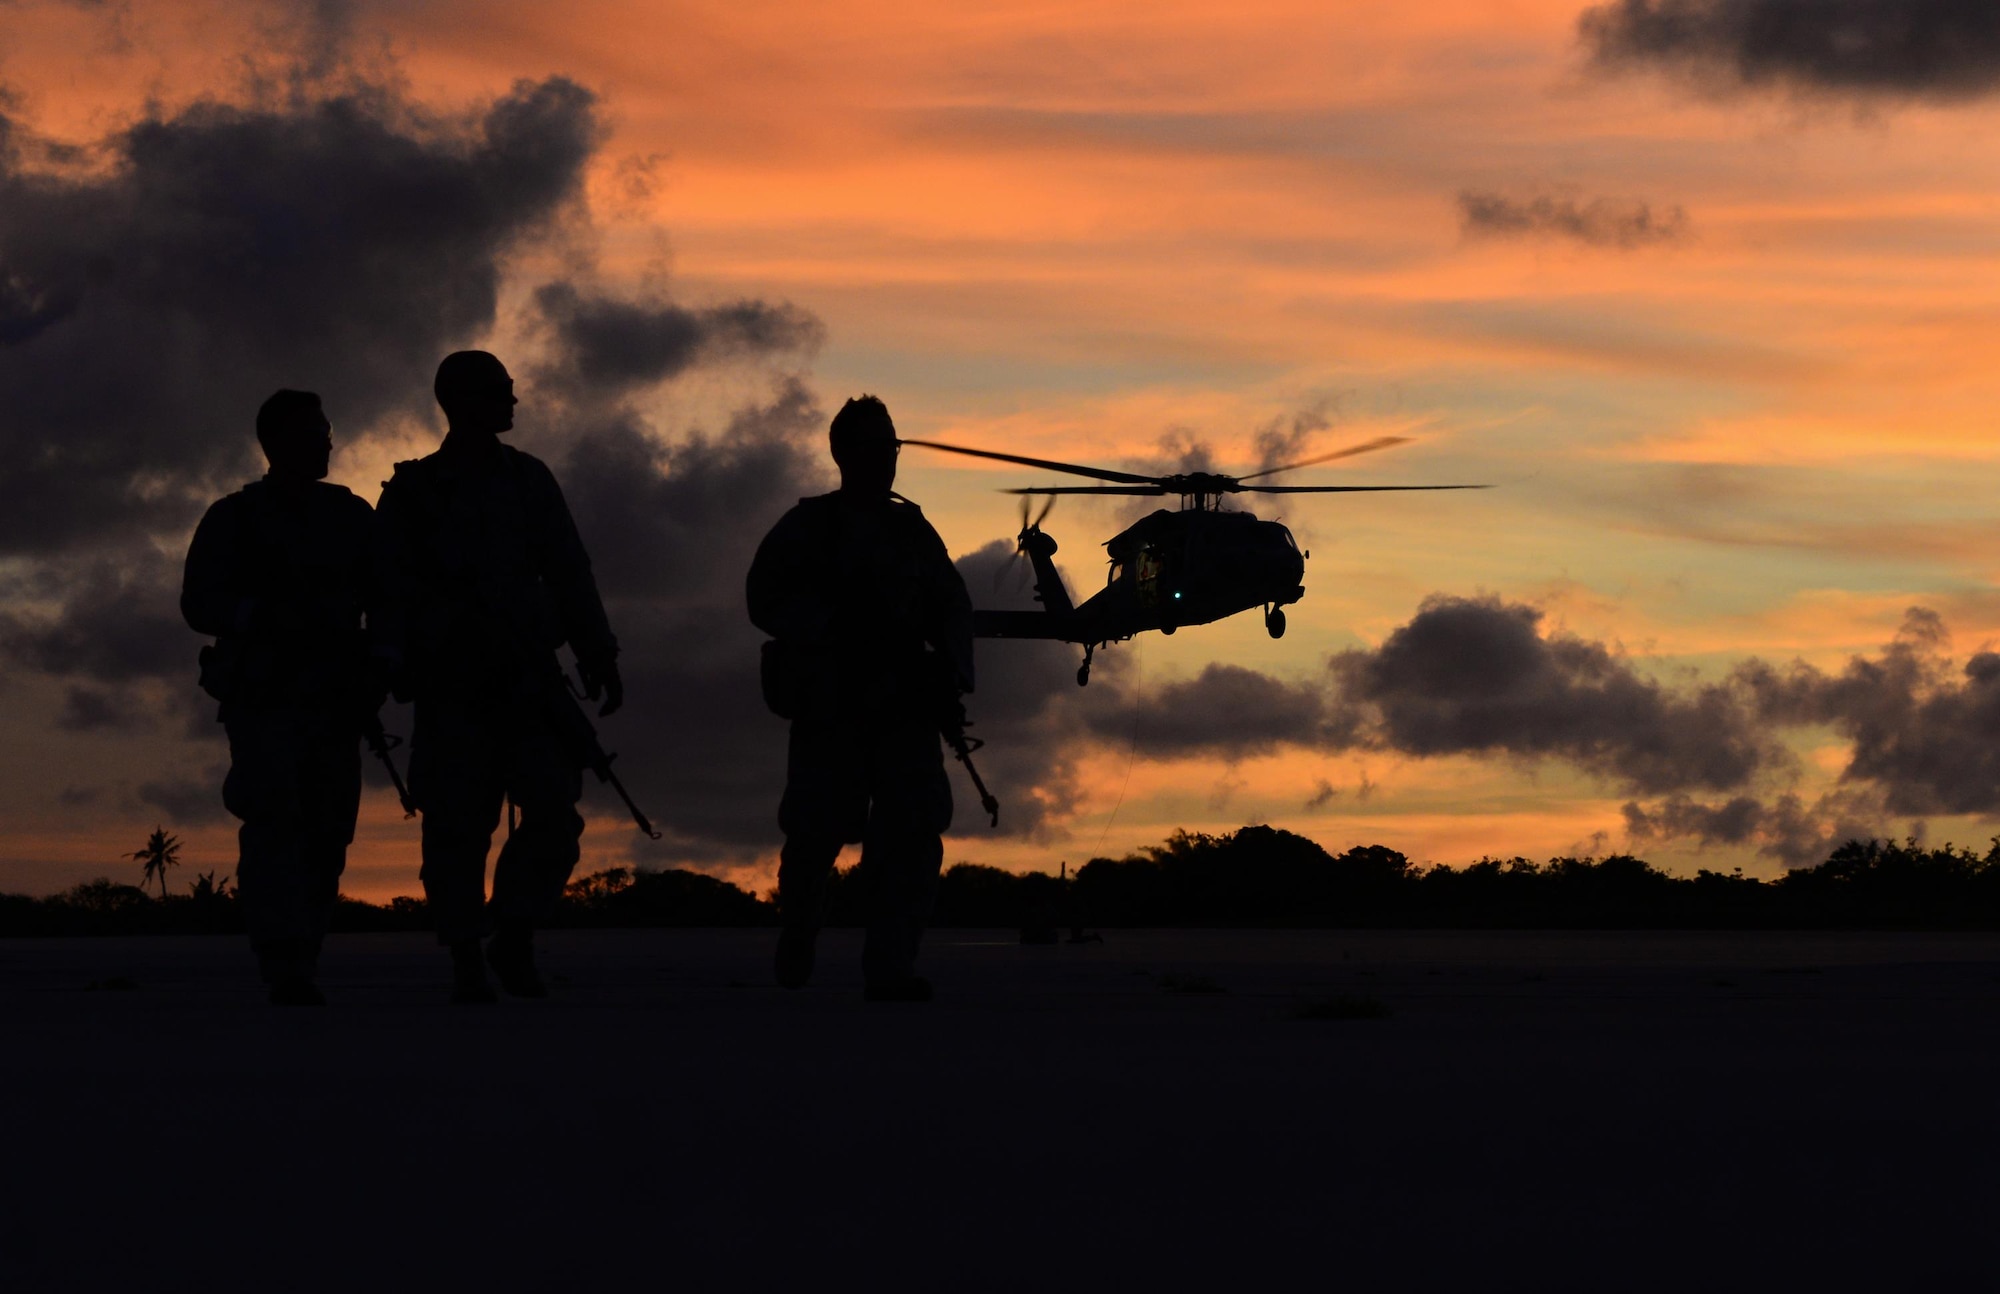 Airmen watch as an MH-60 Seahawk takes off during a jungle training course June 15, 2016, at Andersen Air Force Base, Guam. Conducted by the U.S. Army 25th Infantry Division's Lightning Academy Jungle Operations Training Center from Schofield Barracks, Hawaii, and supported by 736th Security Forces Squadron Commando Warrior cadre, students prepared a simulated patient for medical evacuation. During the course, they also learned survival skills, including land navigation and evasion techniques. (U.S. Air Force photo by Senior Airman Joshua Smoot)